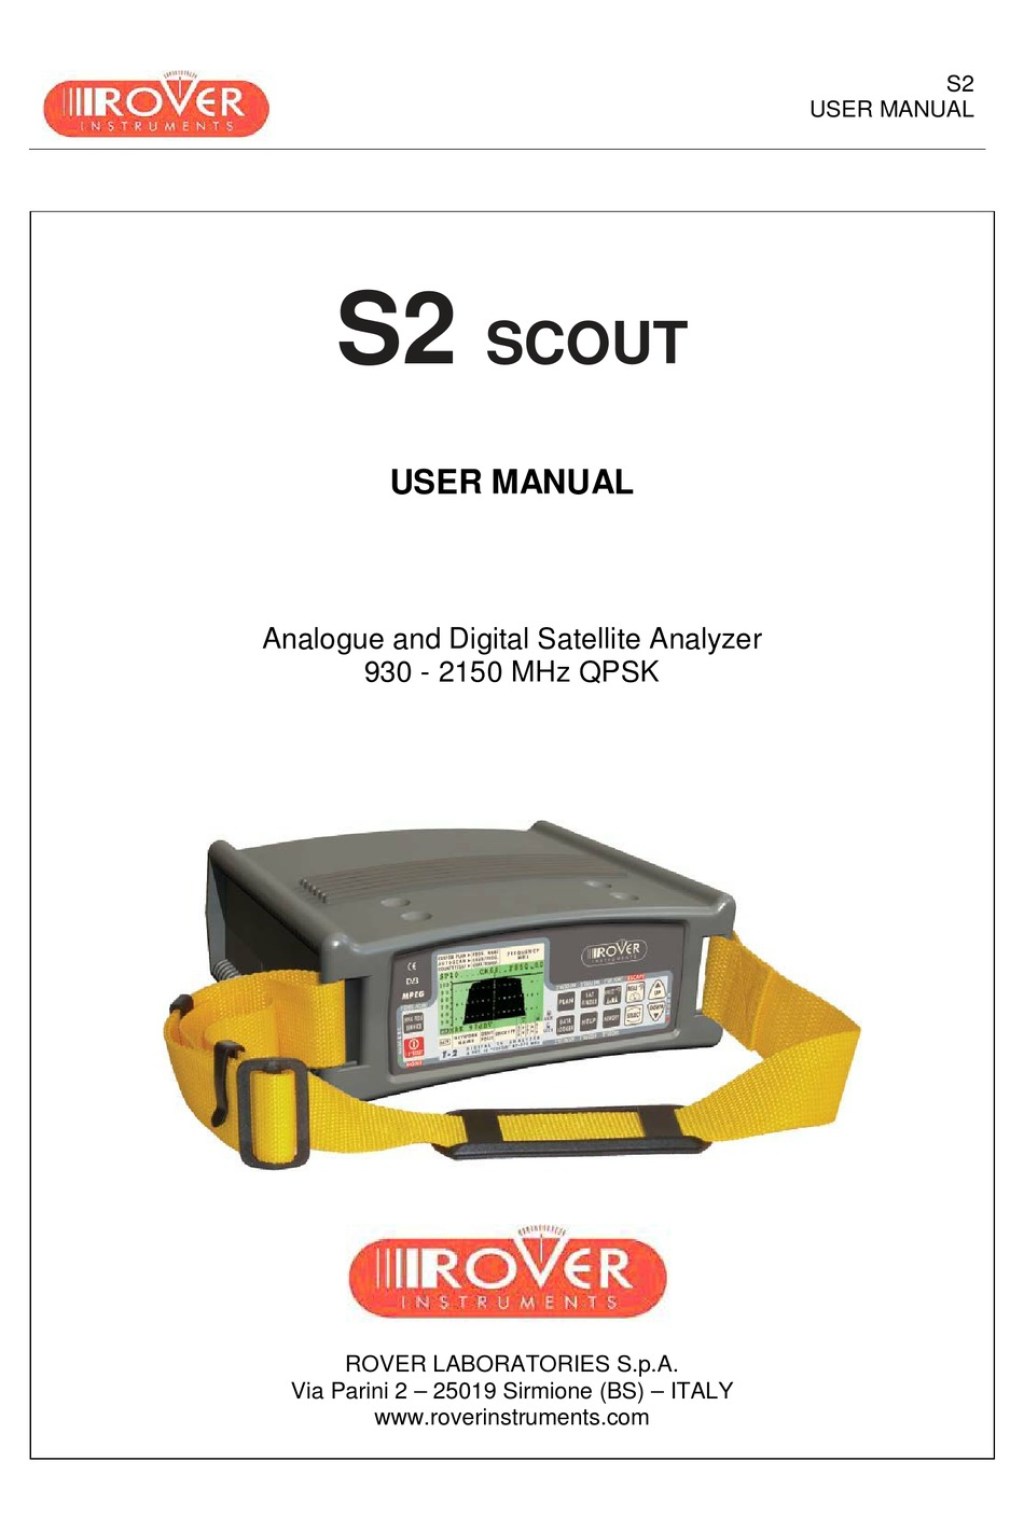 Picture of: ROVER S SCOUT USER MANUAL Pdf Download  ManualsLib